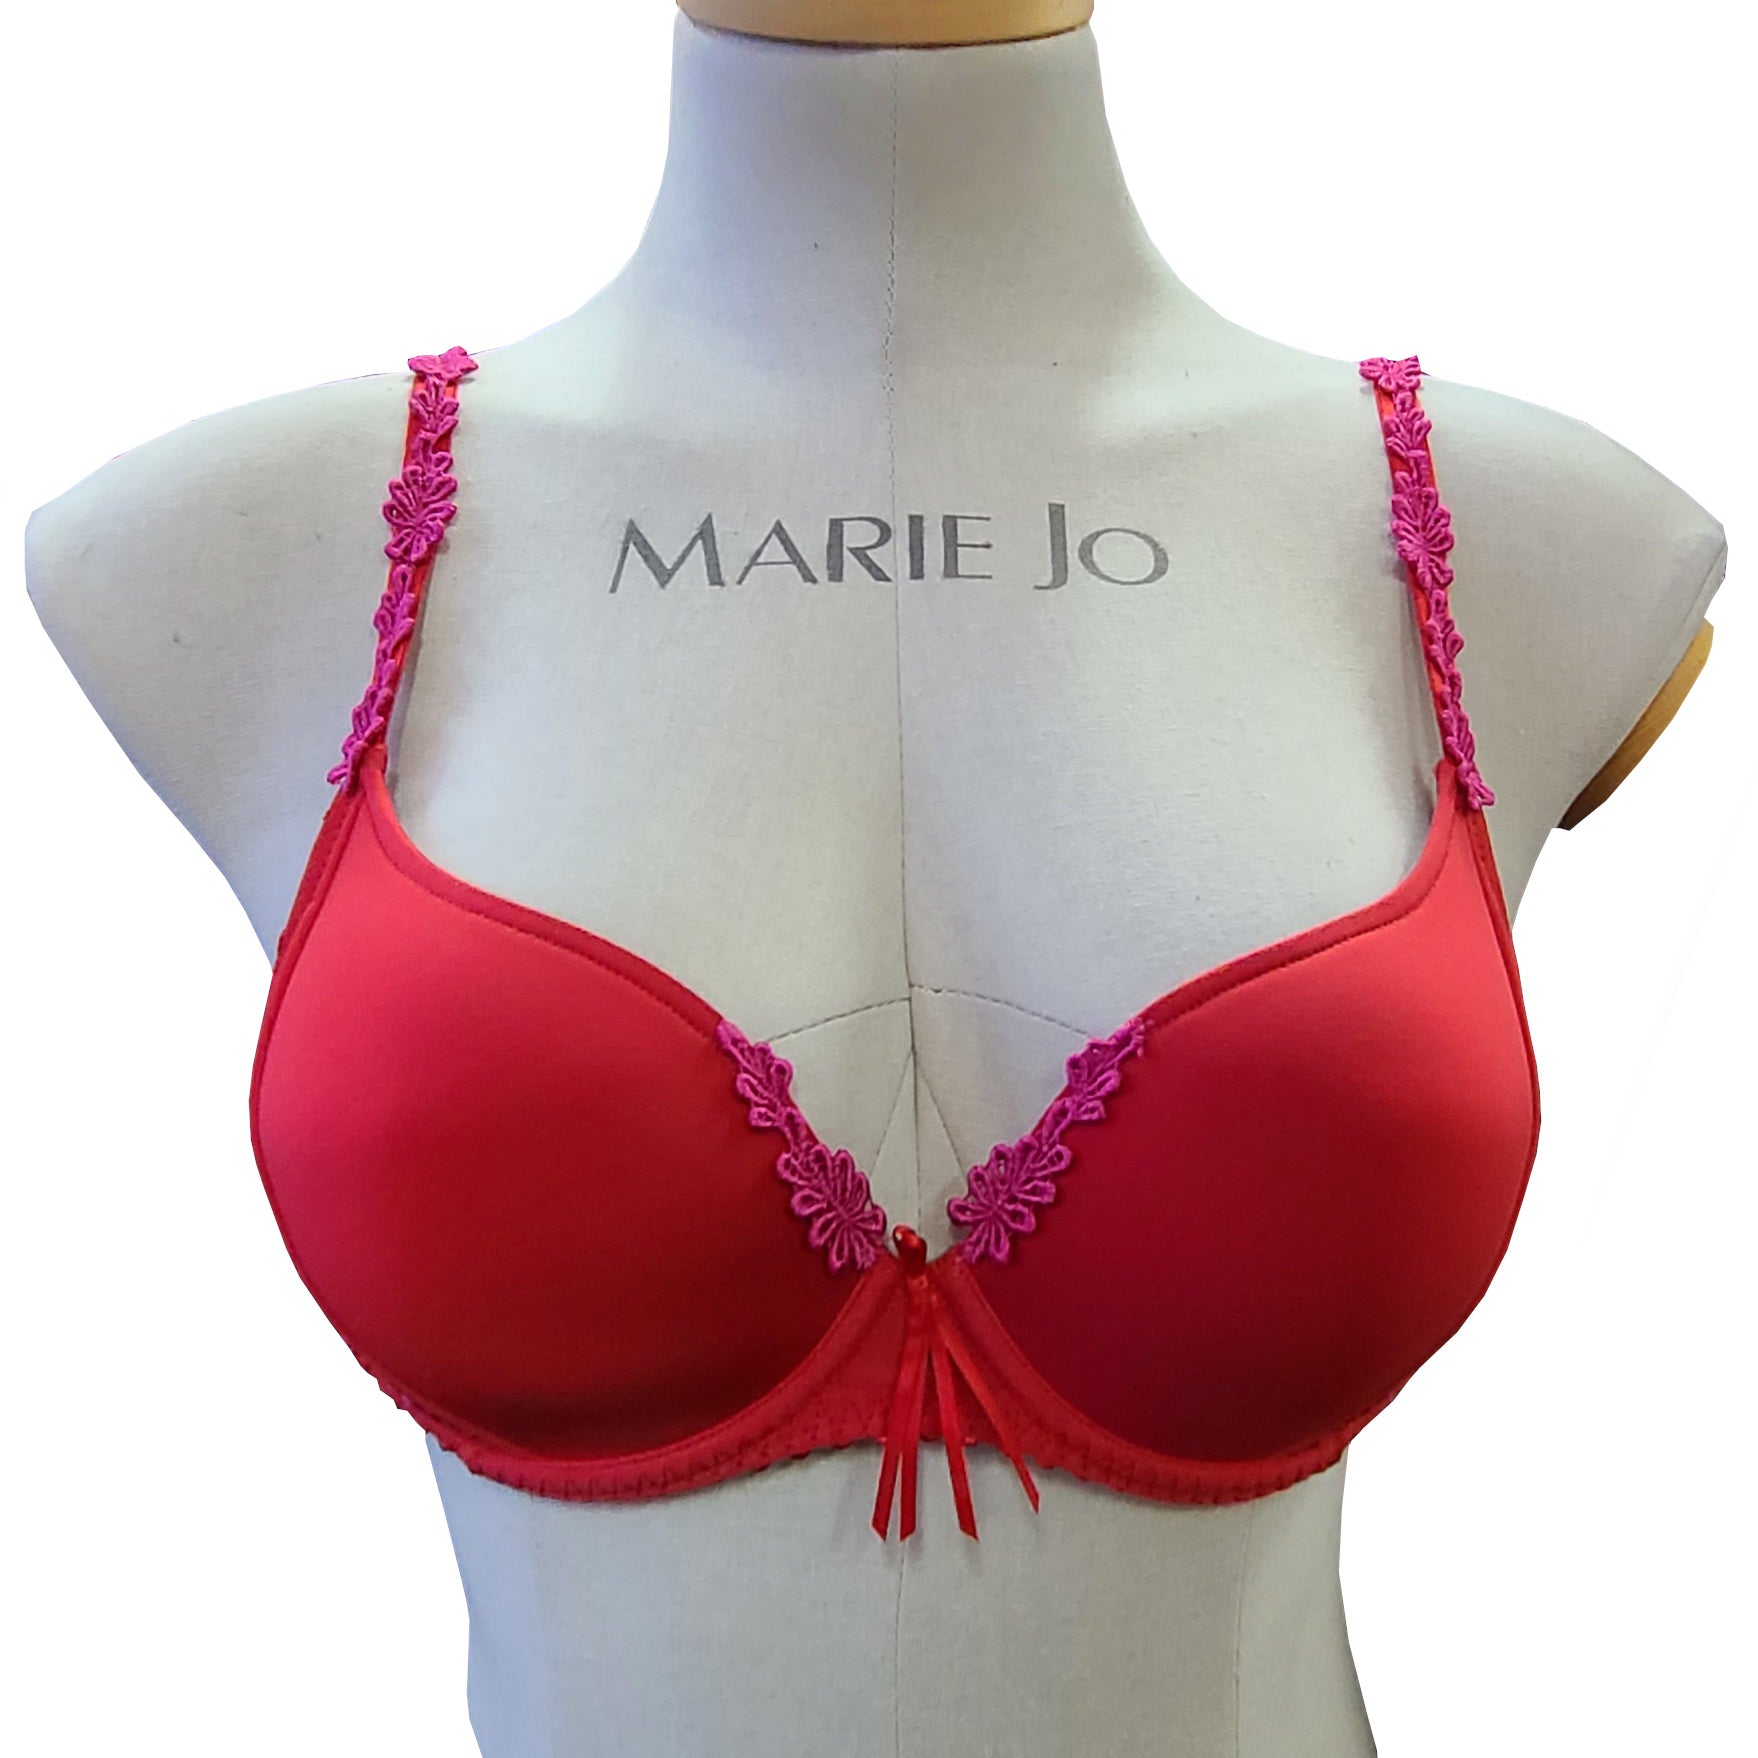 Marie Jo Bra Full Cup Size UK 32E Judith Underwired Non Padded Semi Sheer -  Red